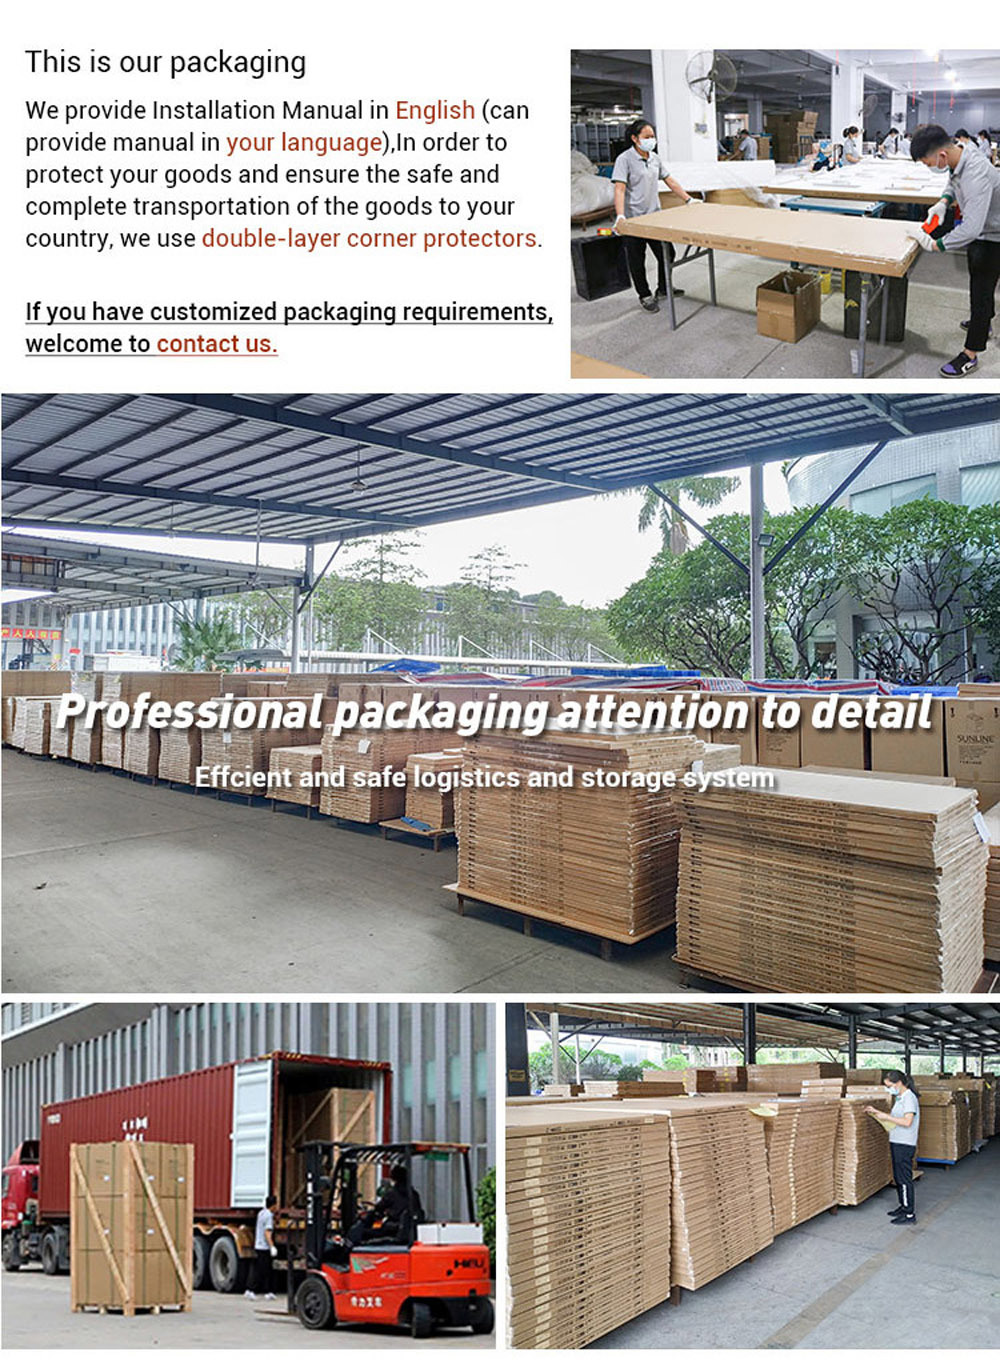 Wholesale Office Furniture Modern Cubical Workstation Modular Office Partition